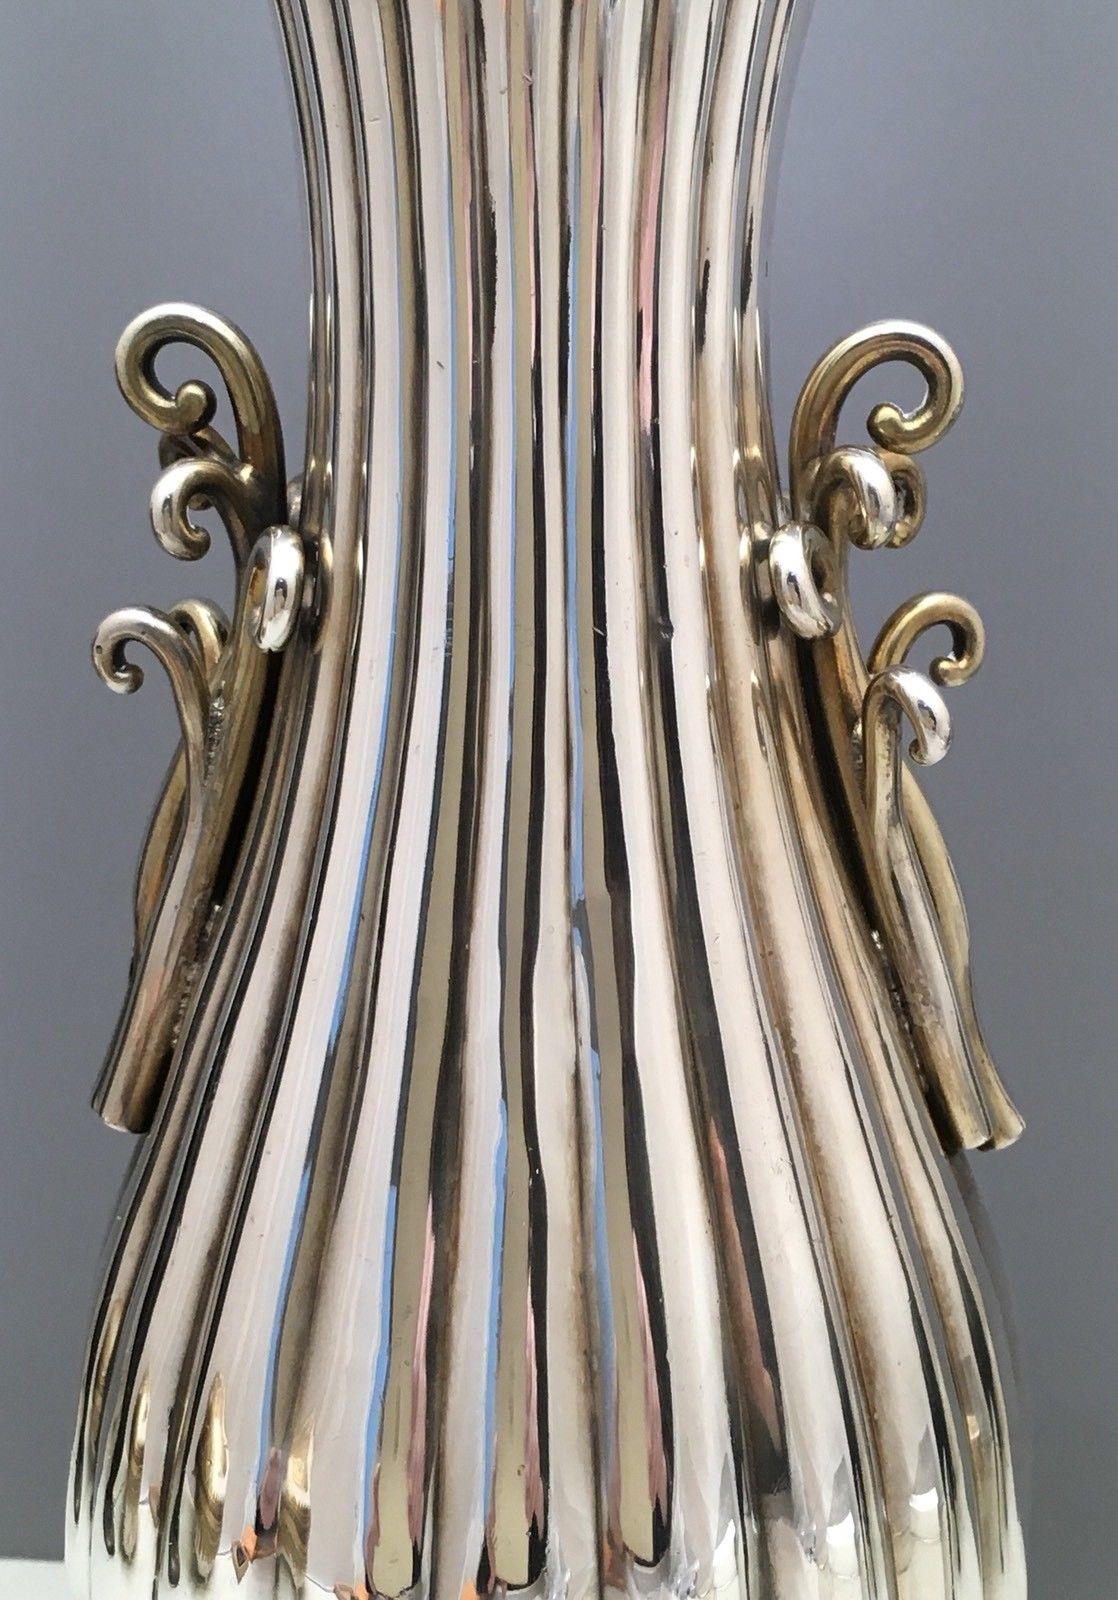 Hand-Crafted Stunning Japanese Sterling Silver Waves Vase, Early 20th Century